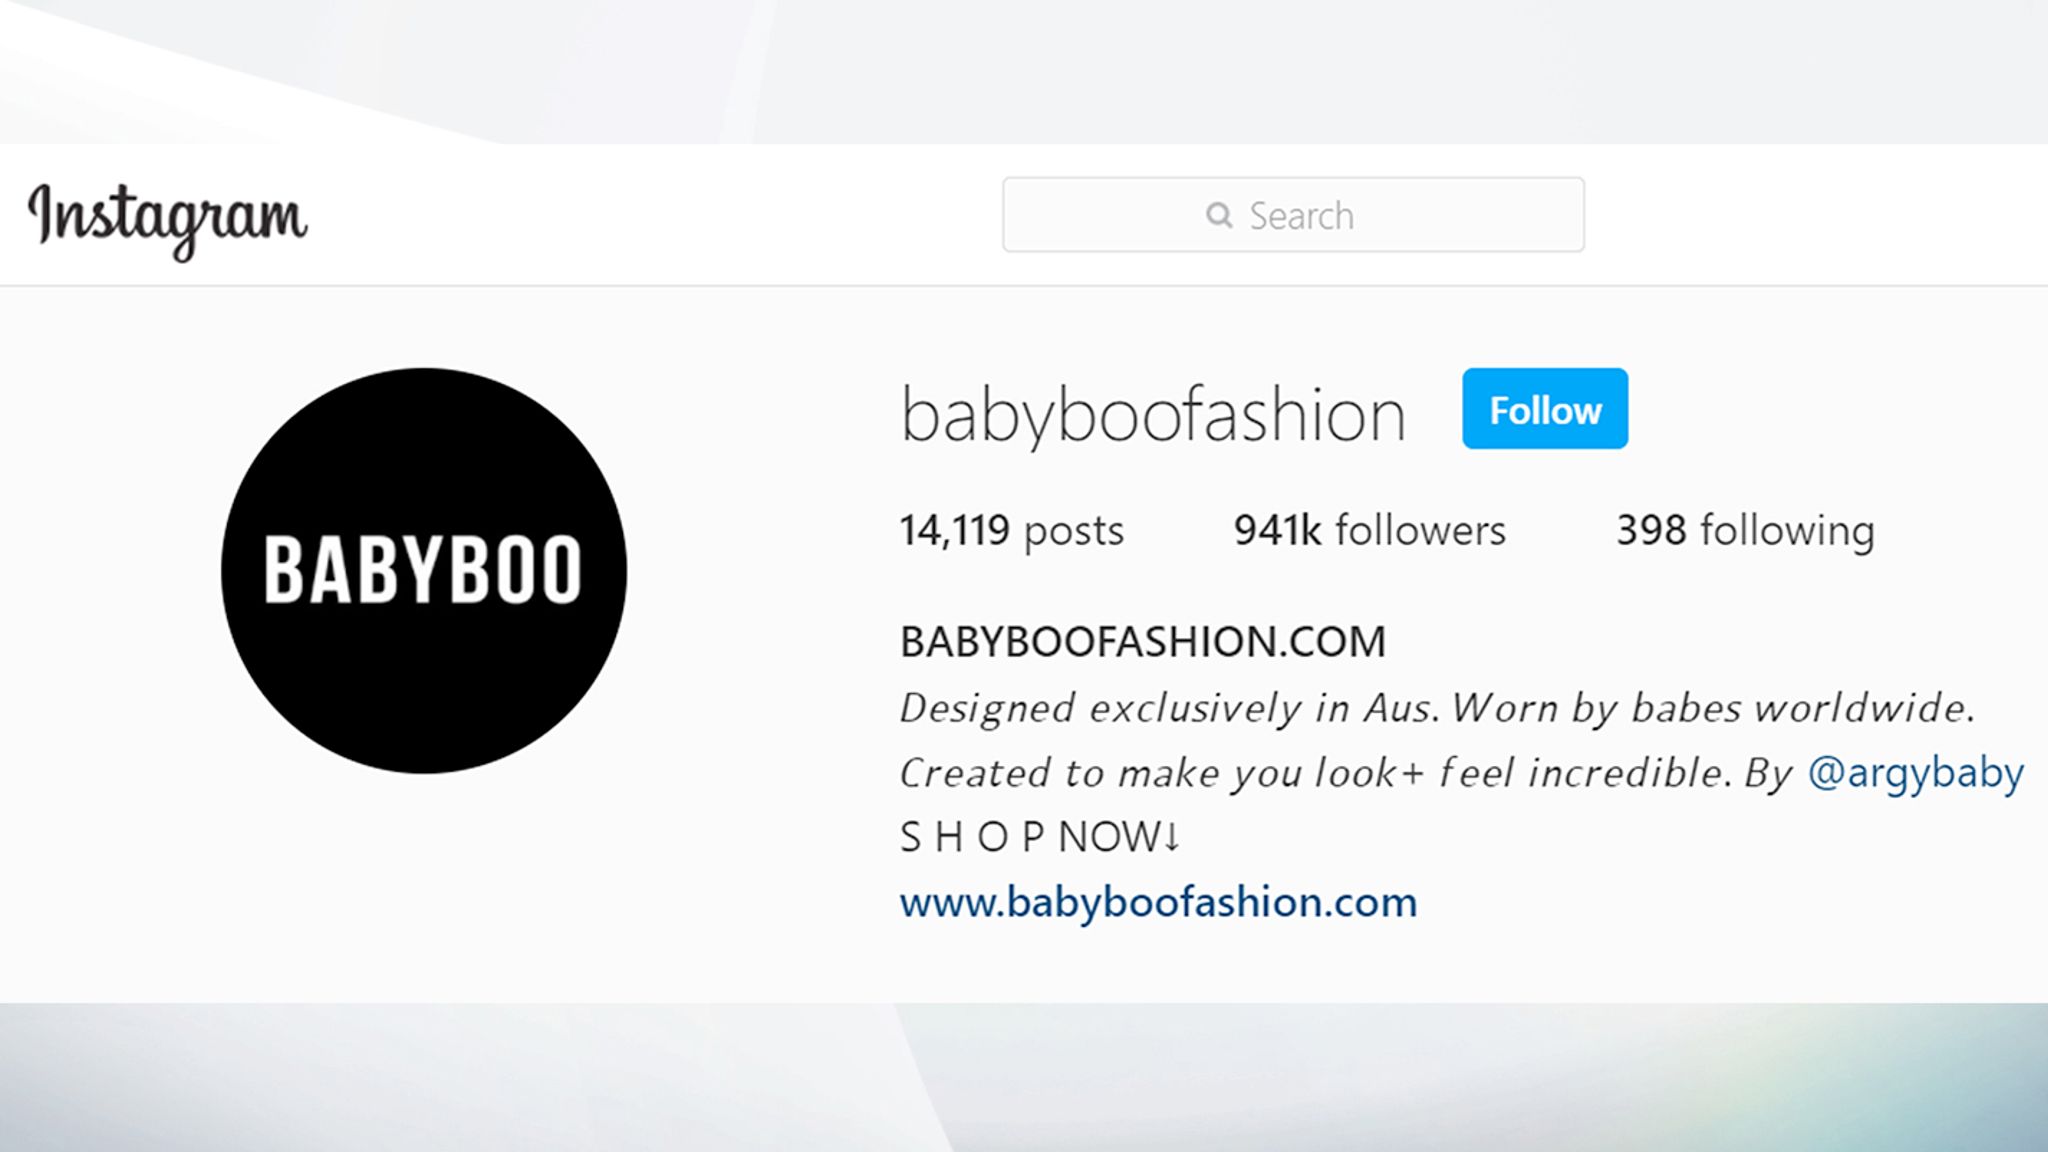 Babyboo Instagram advert on Halloween fashion banned for objectifying women, Business News